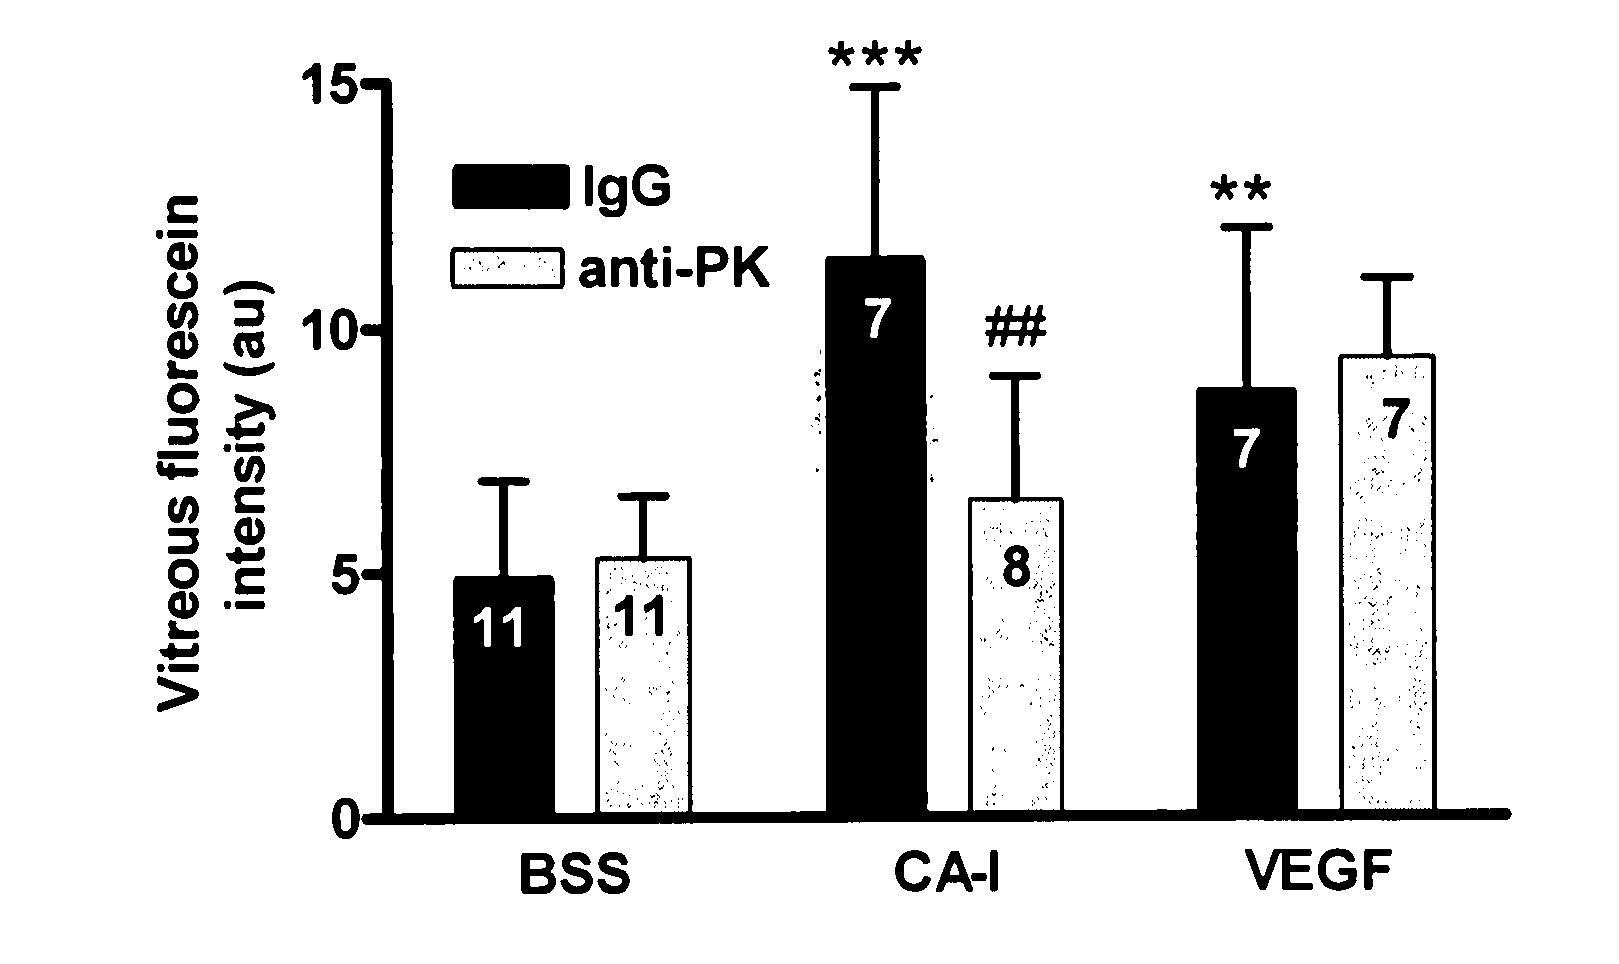 Methods of diagnosing, treating, and preventing increased vascular permeability